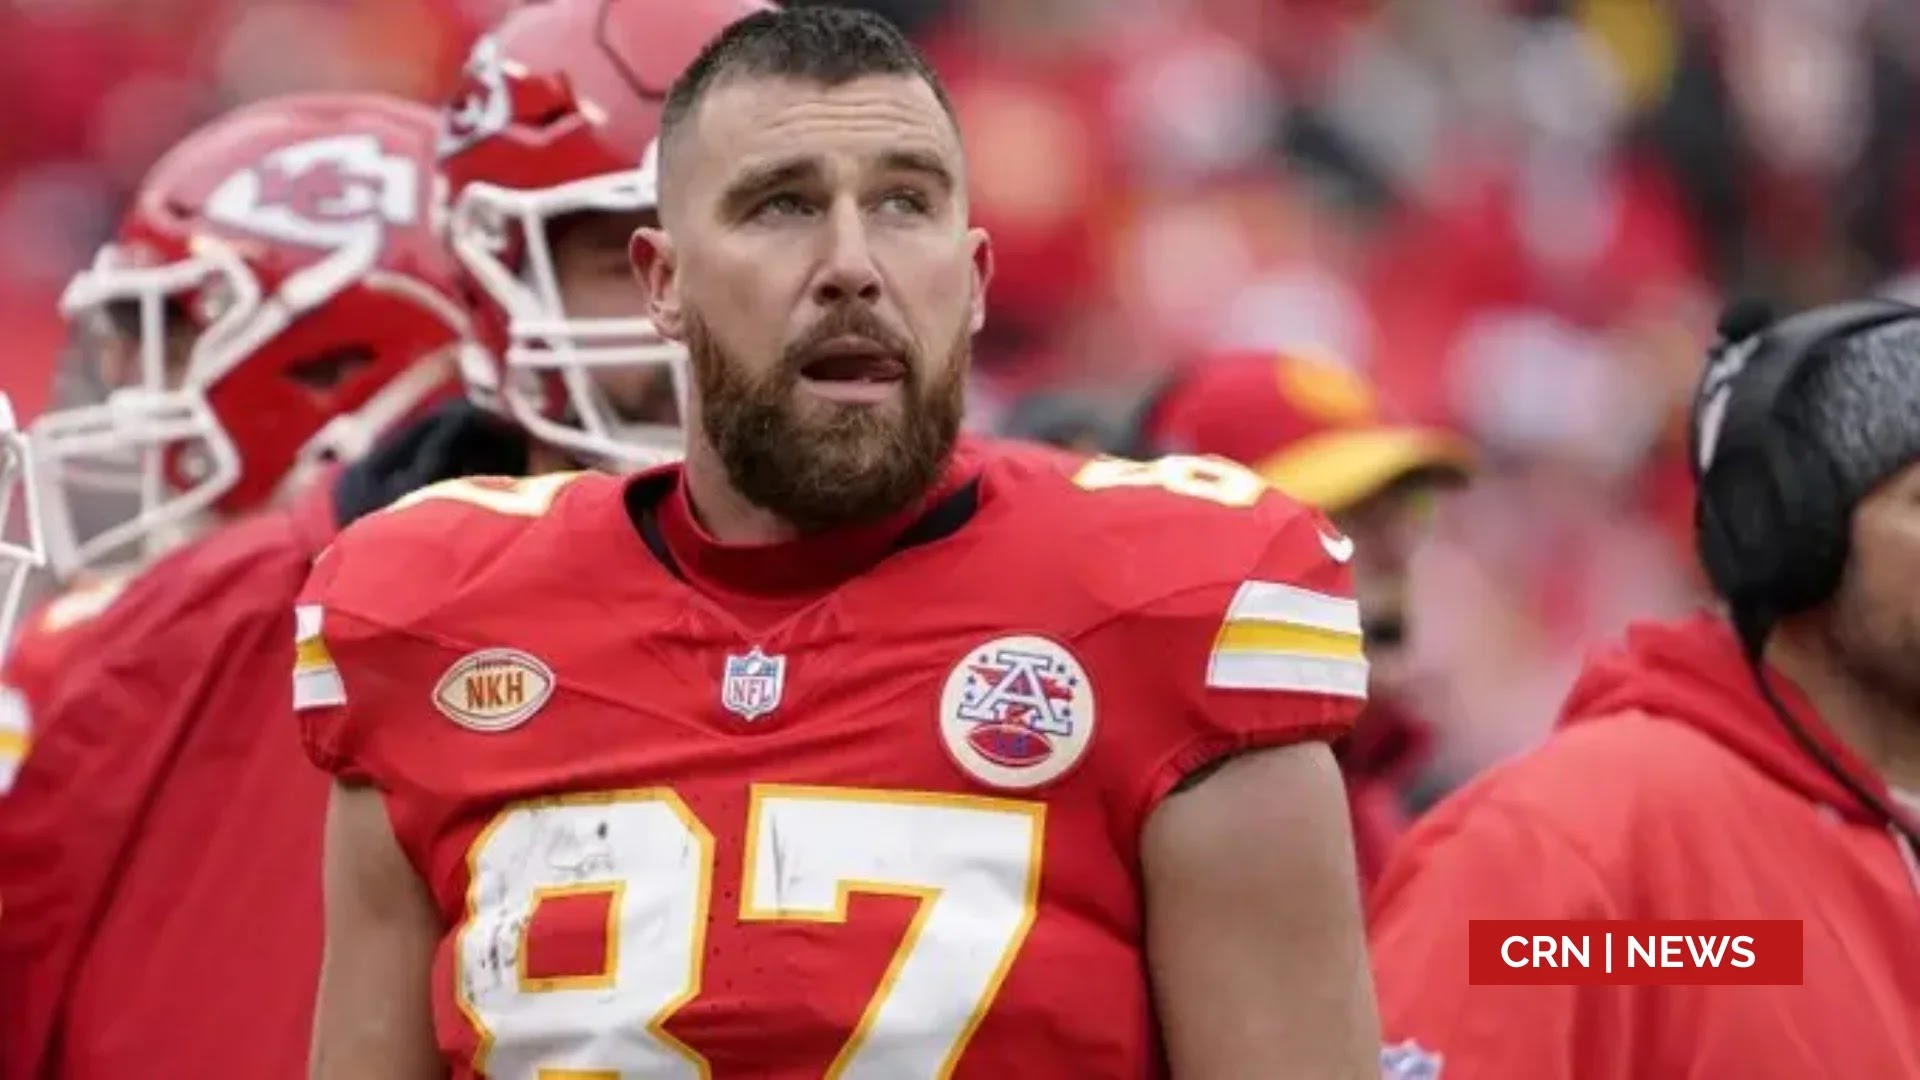 Chiefs' Andy Reid and Travis Kelce hash things out after sideline outburst vs Raiders